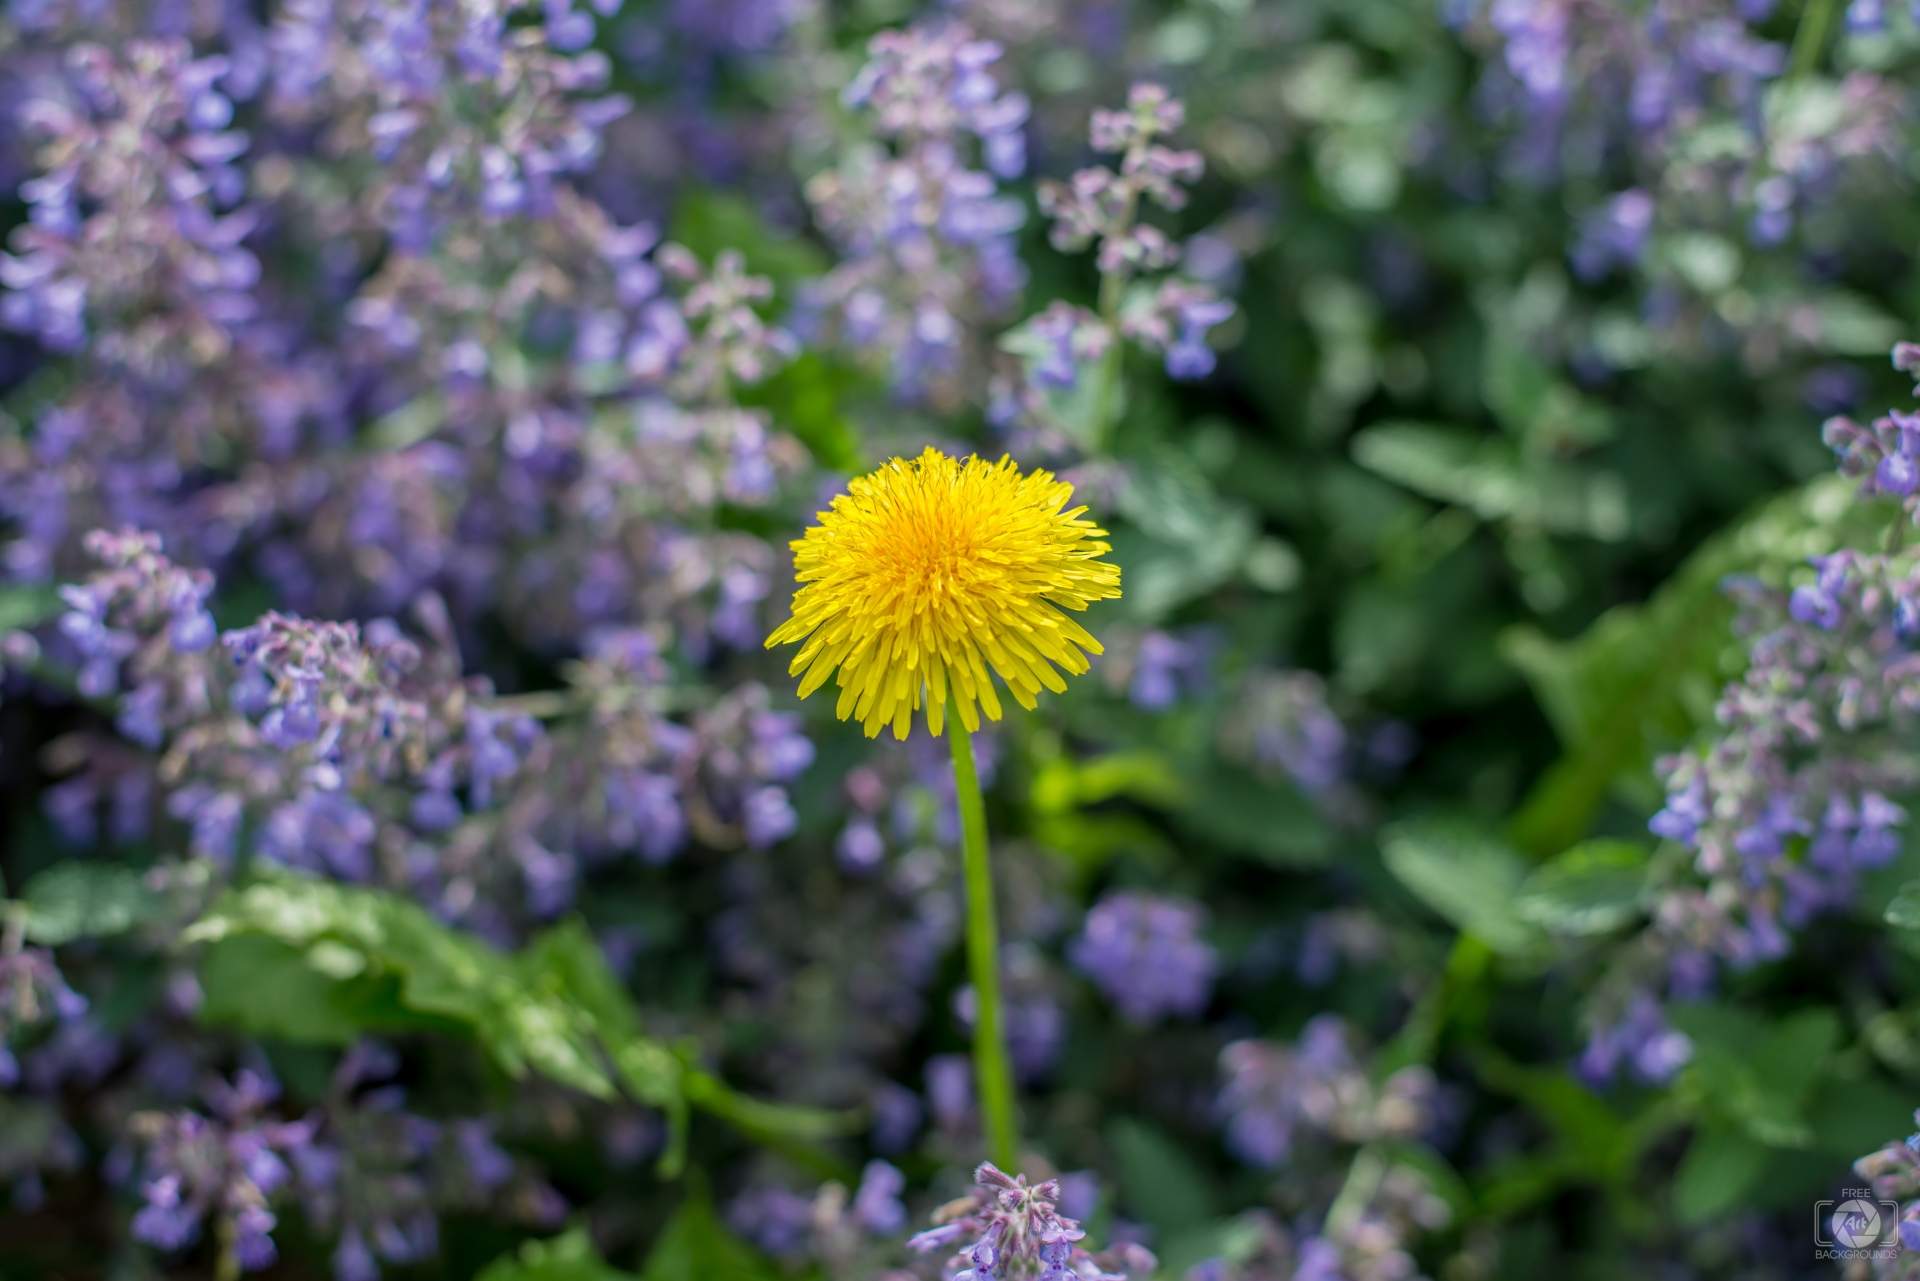 Dandelion and Wild Purple Flowers Background - High-quality Free ...